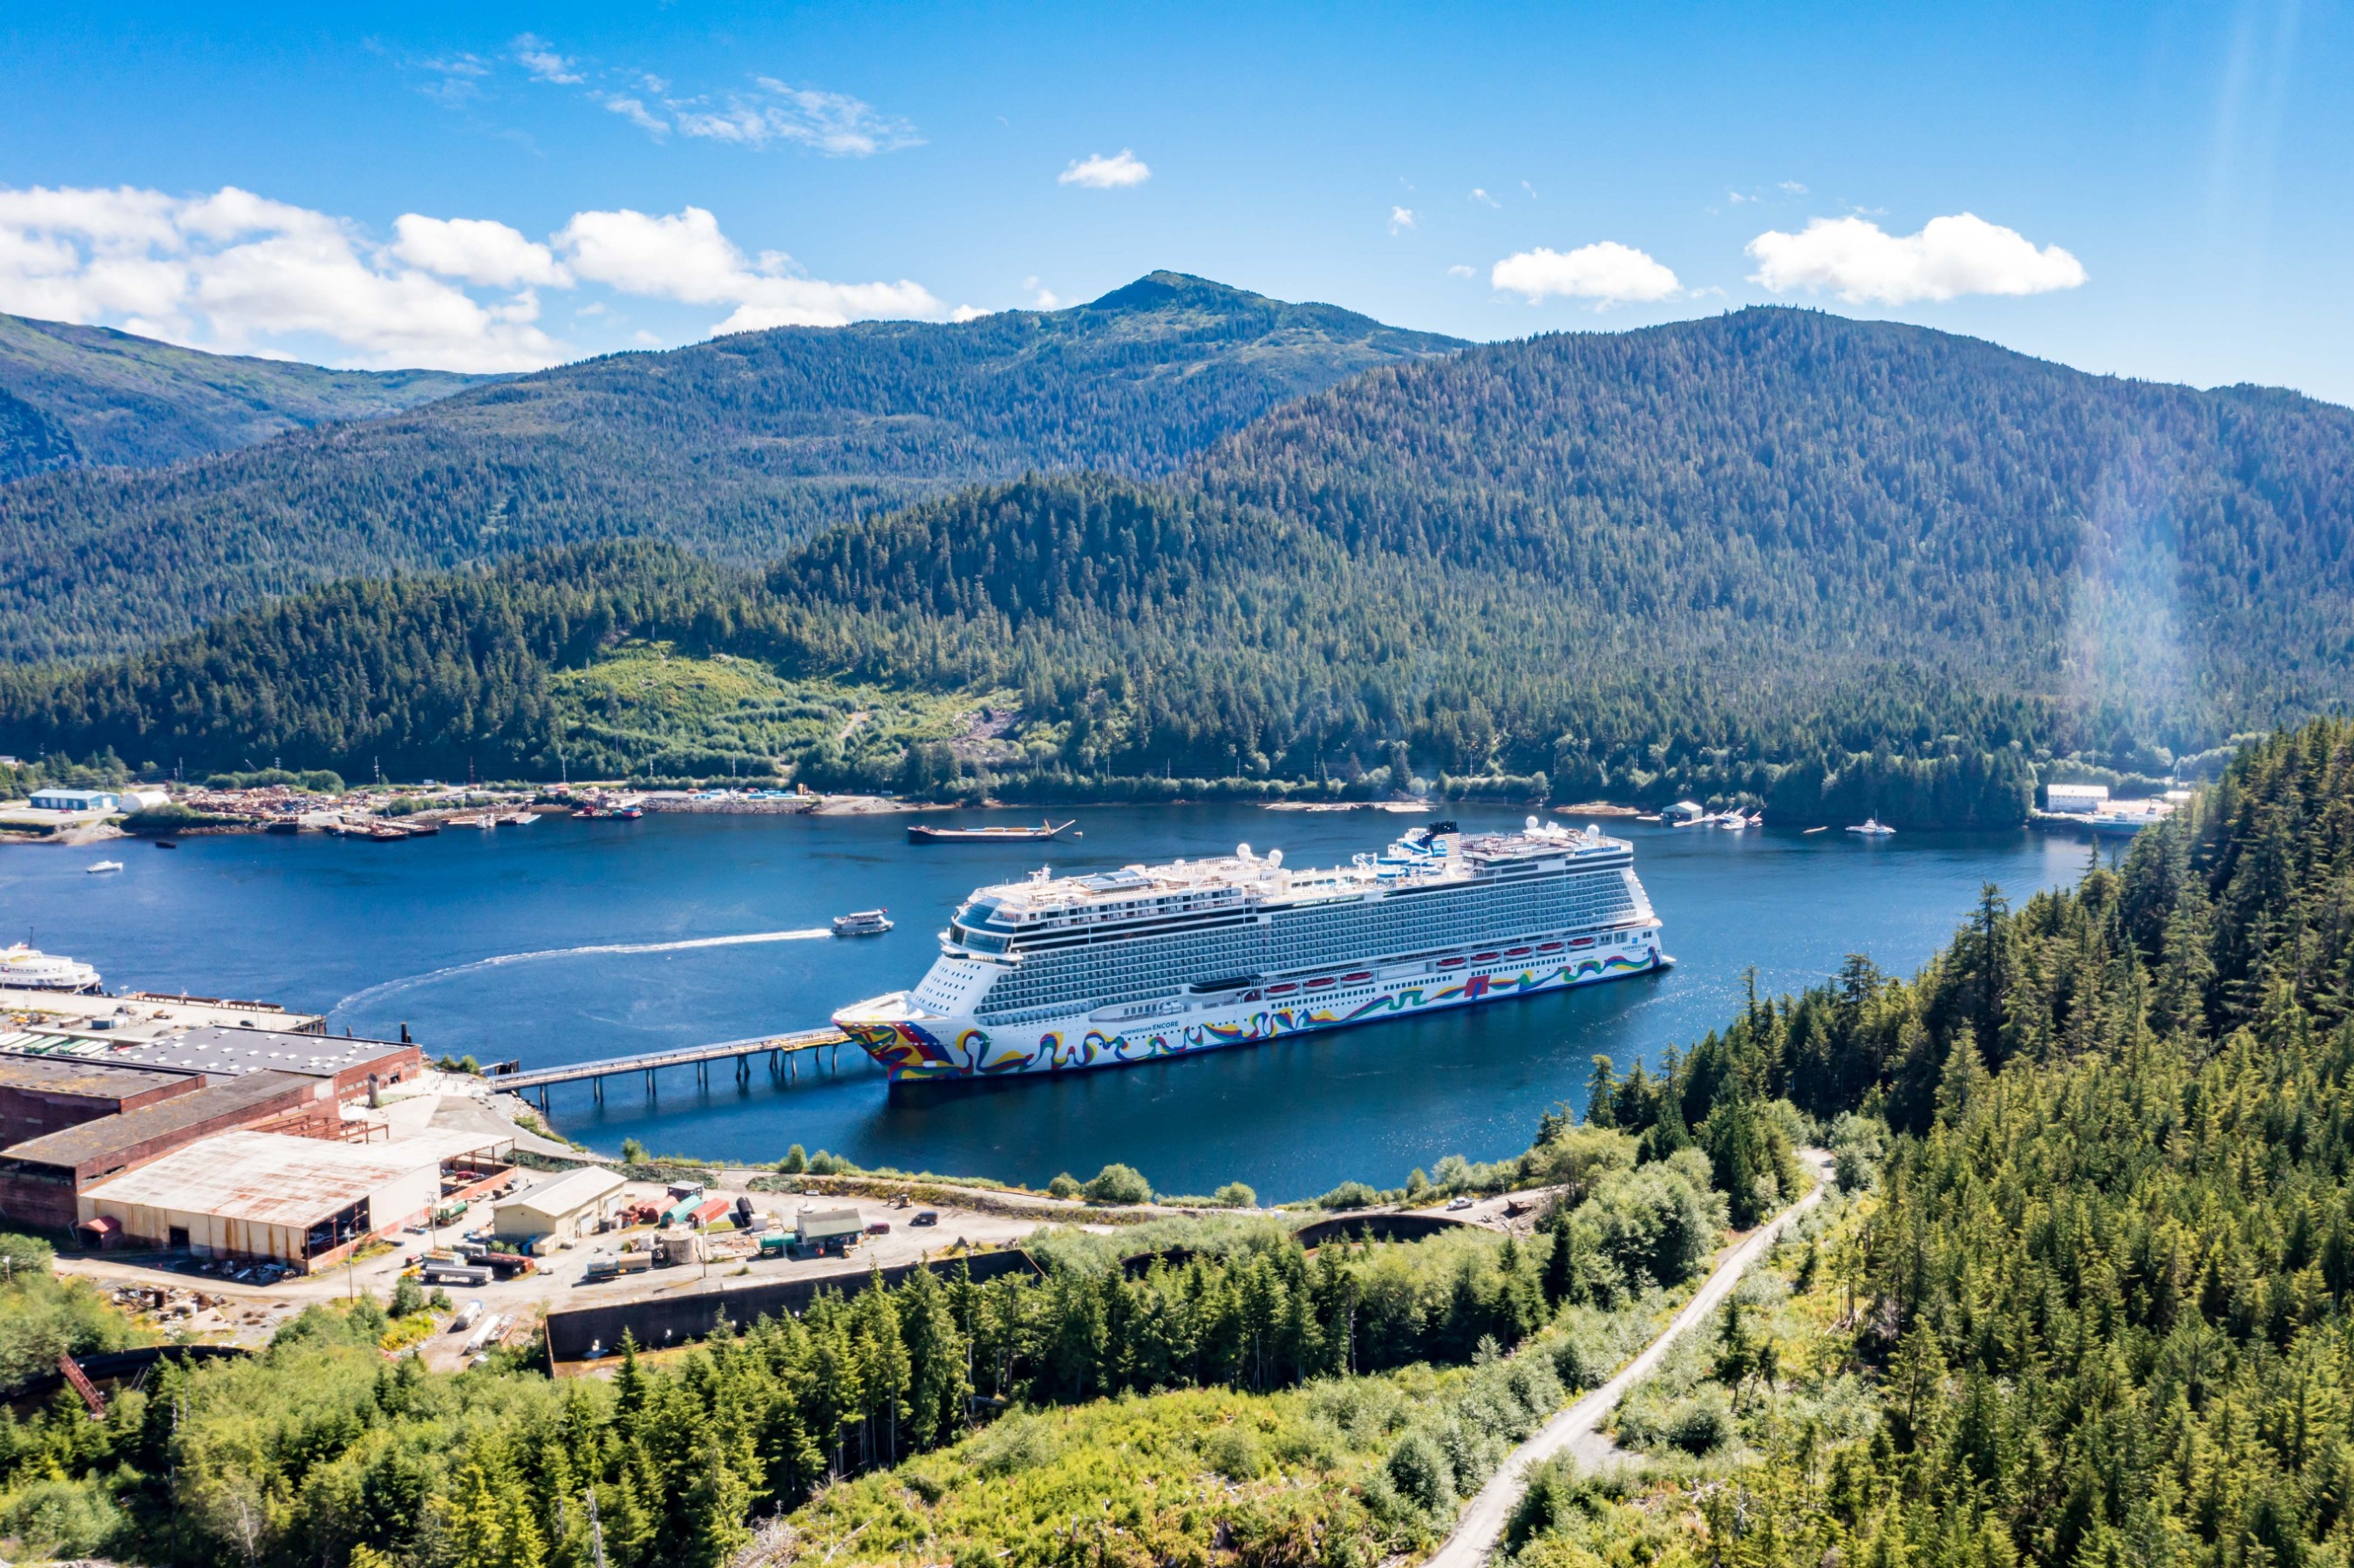 Norwegian Cruise Line will offer a selection of five-to-16-day voyages to Alaska during the summer of 2022 across five vessels, including Norwegian Encore, the company’s newest and most innovative ship.